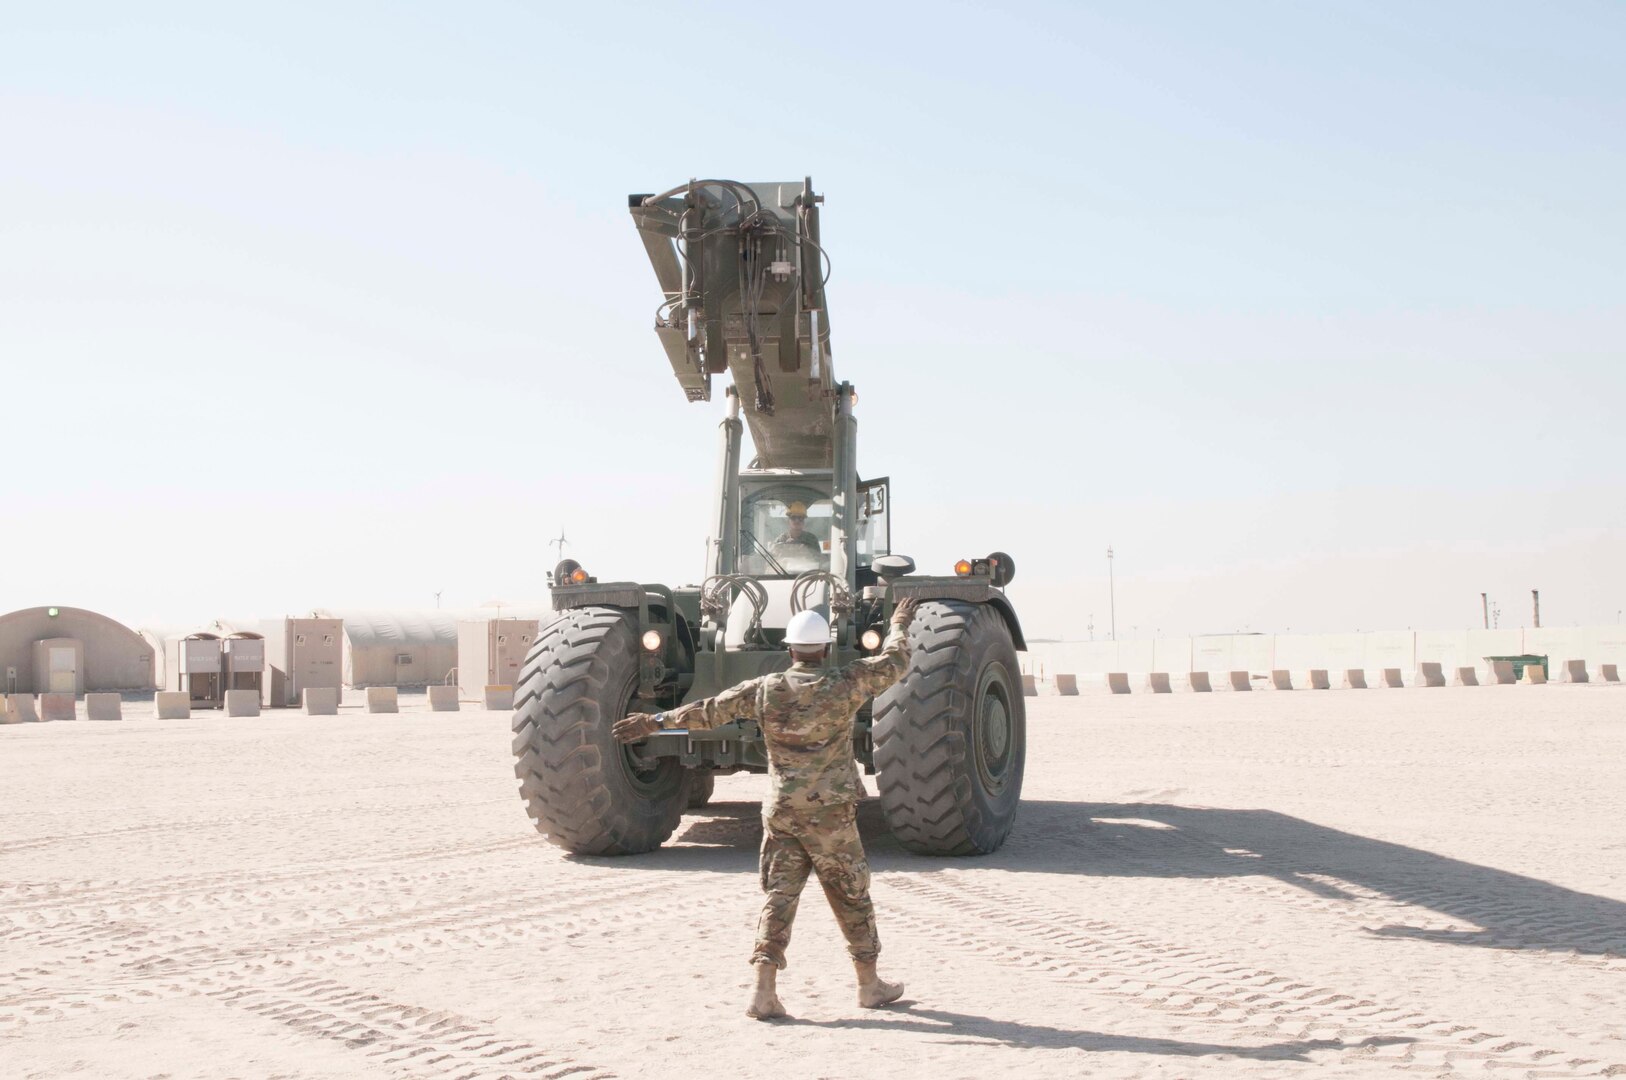 U.S. Army Master Sgt. Edgar Ponce guides Spc. Agnes Torres, both with the 369th Sustainment Brigade, as she drives a Rough Terrain Container Handler (RTCH) at Camp Arifjan, Kuwait, on November 12, 2016. RTCHs are used to move large containers over various types of terrain. 